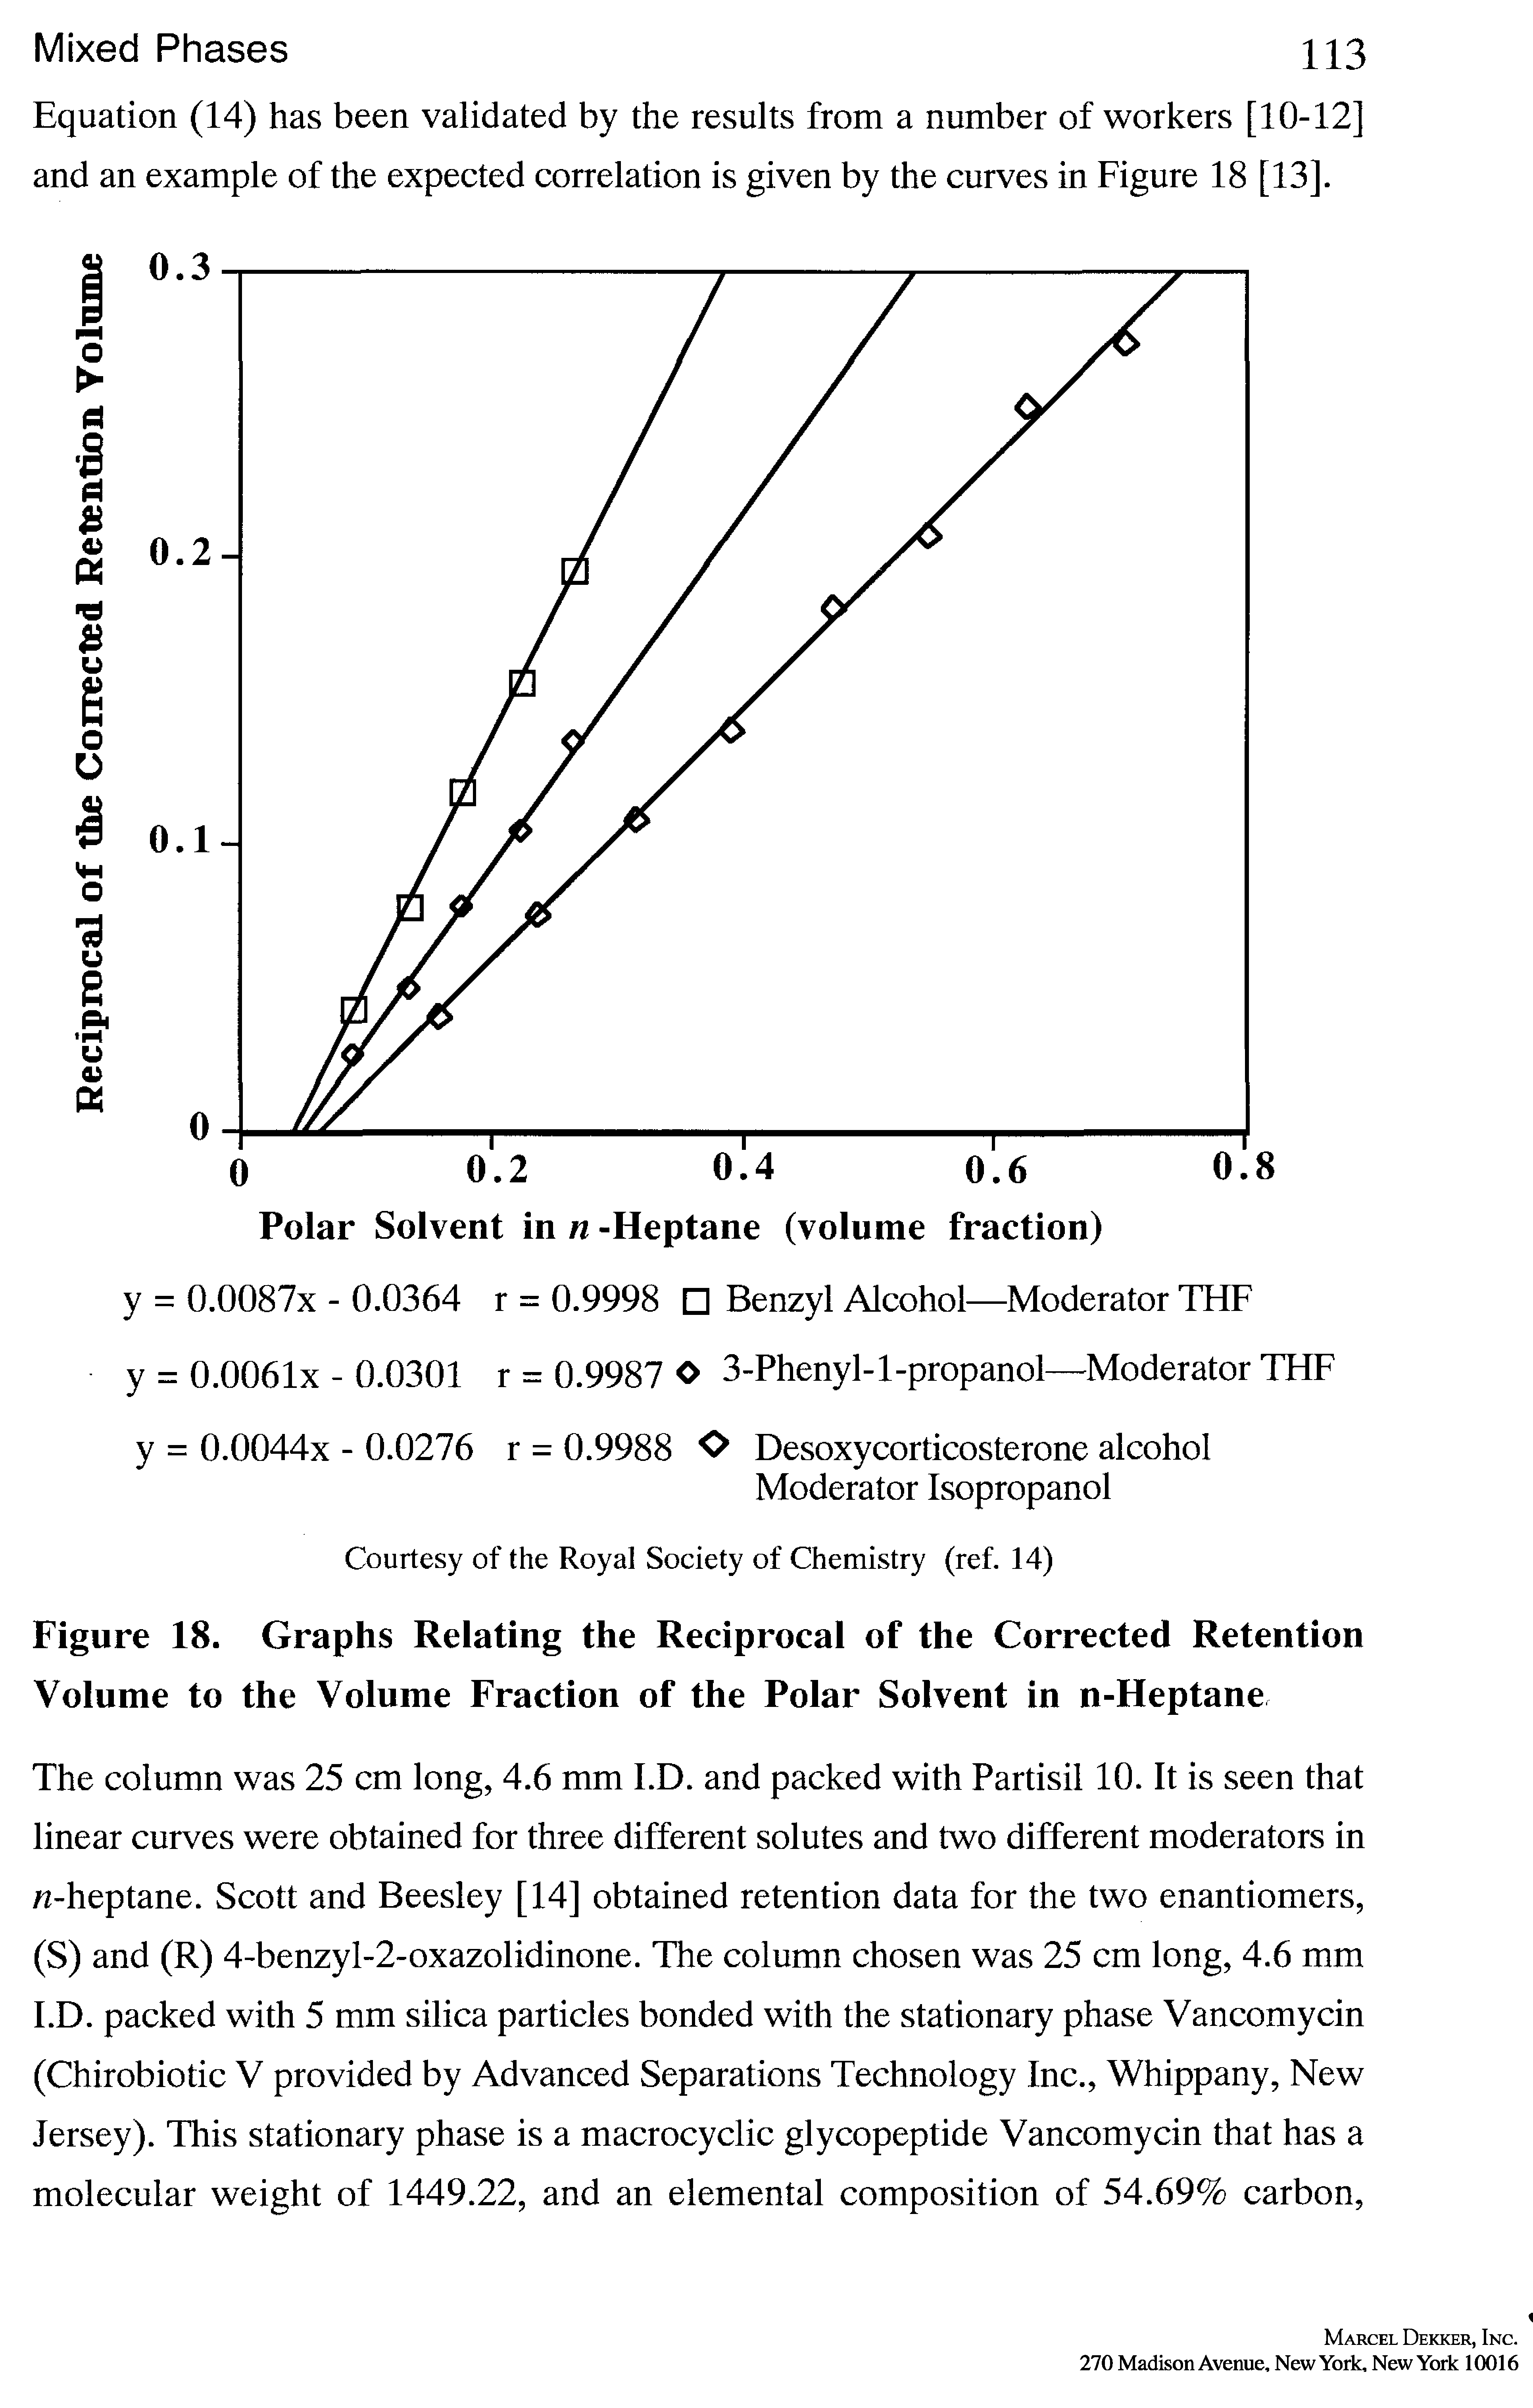 Figure 18. Graphs Relating the Reciprocal of the Corrected Retention Volume to the Volume Fraction of the Polar Solvent in n-Heptane.